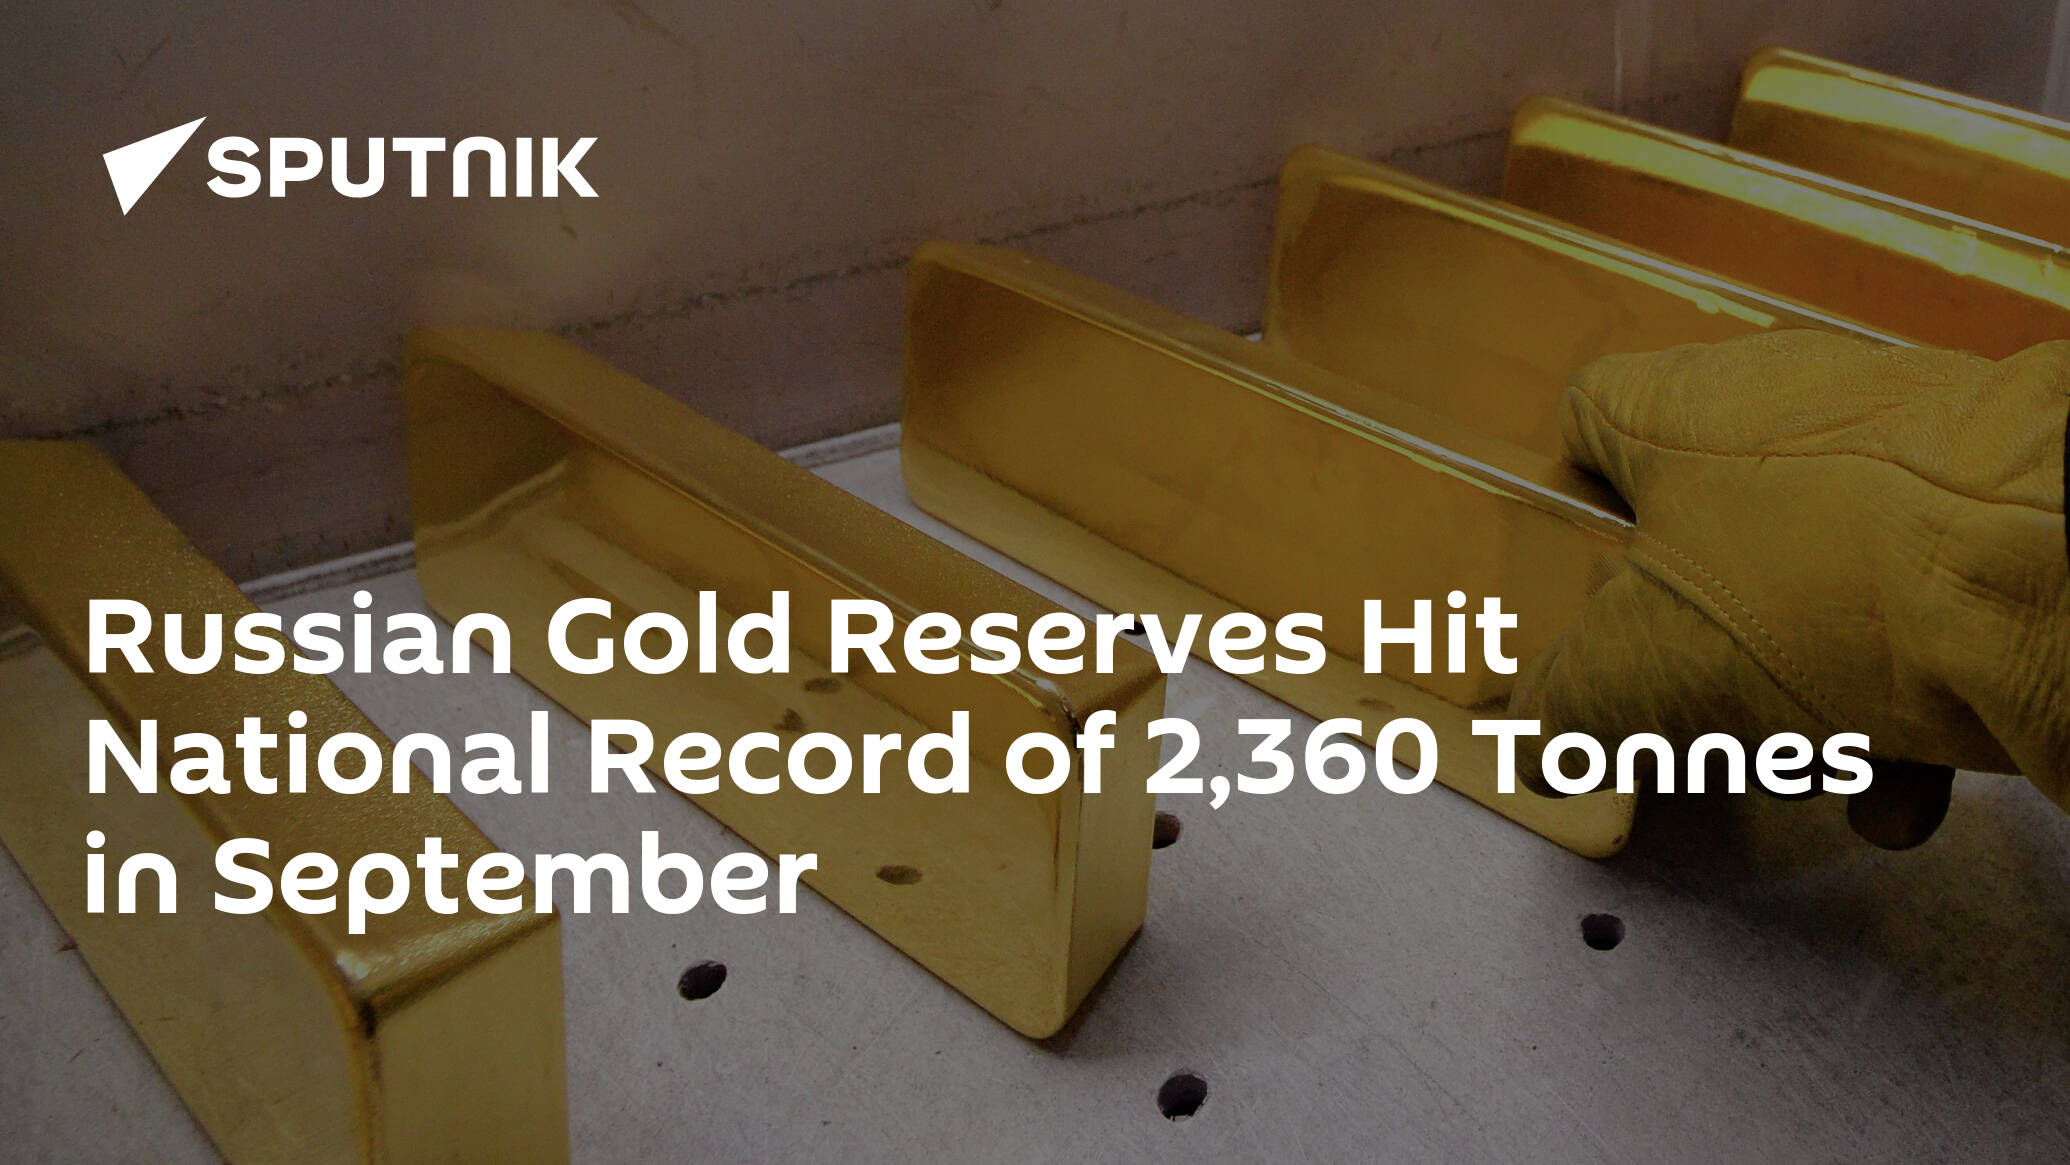 Russian Gold Reserves Hit National Record of 2,360 Tonnes in September